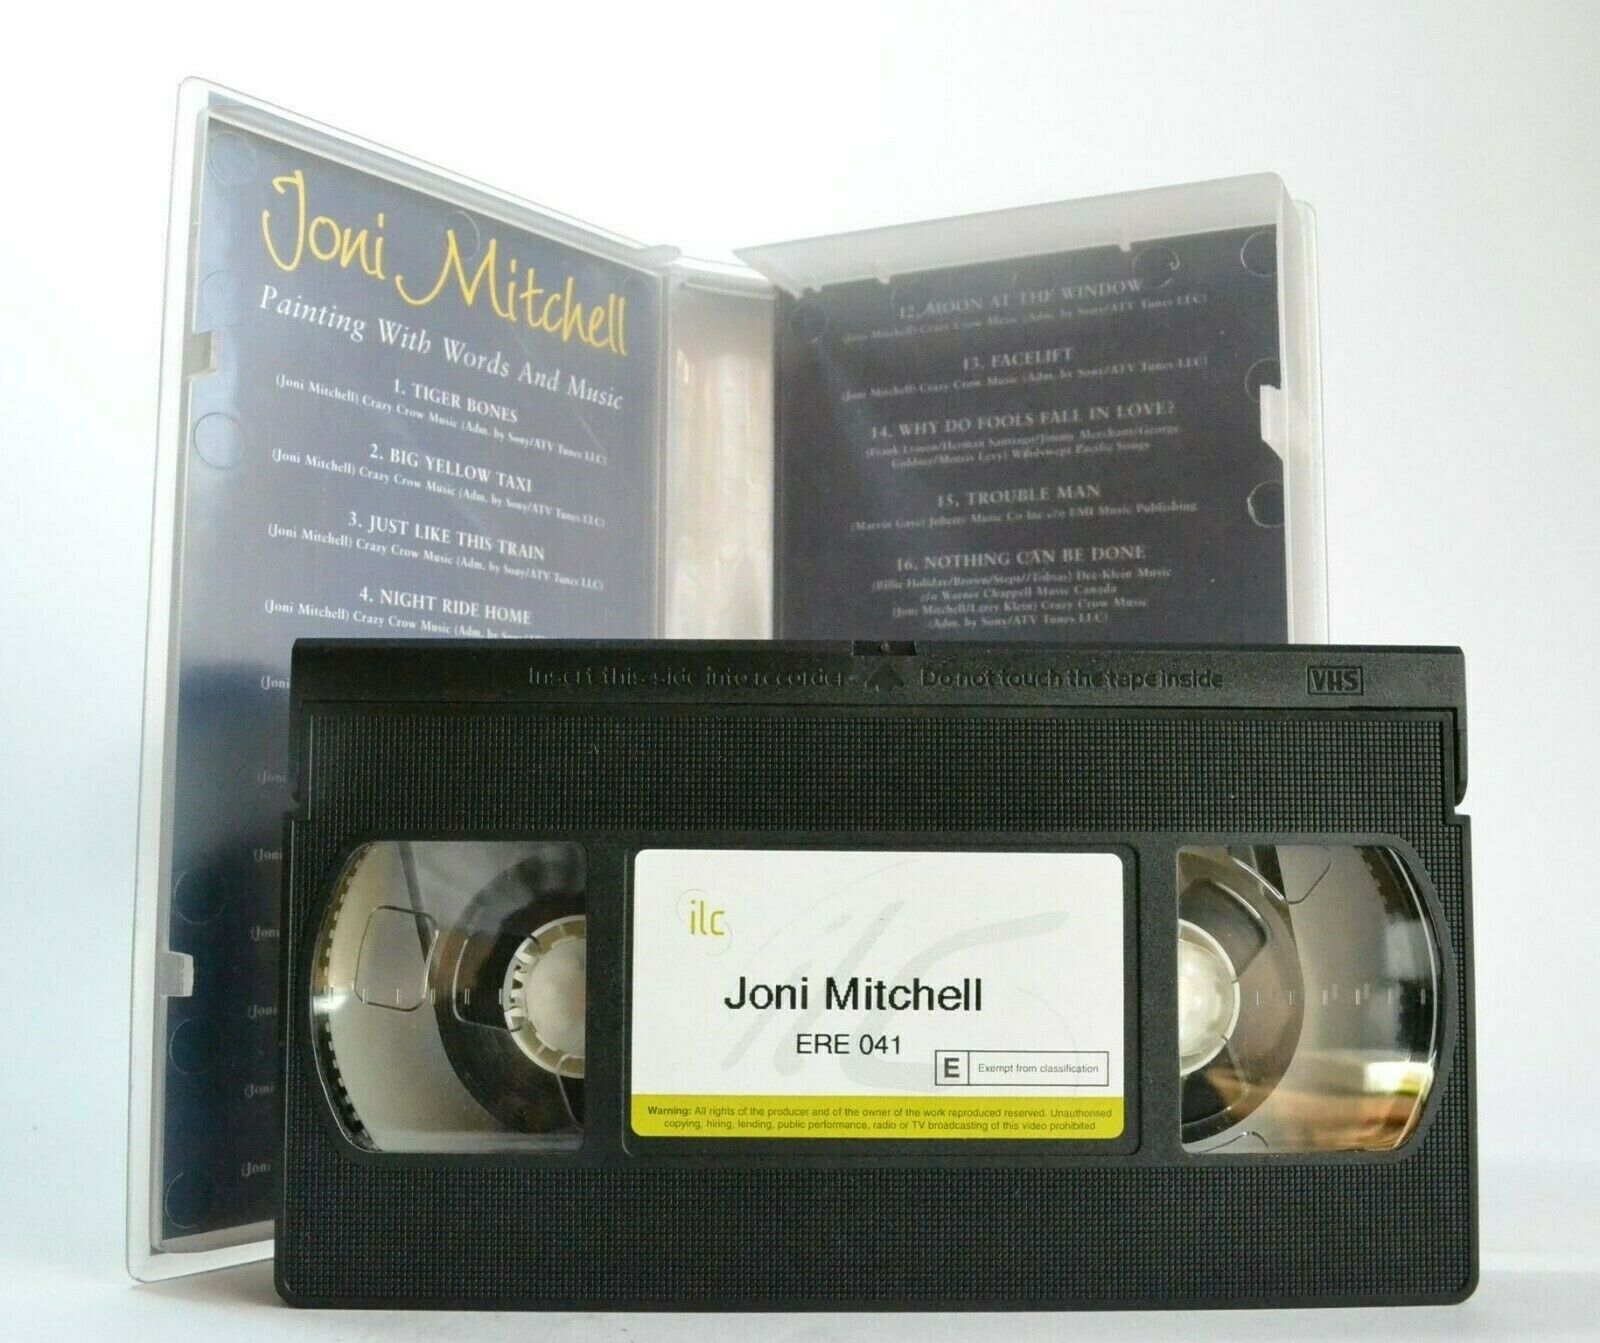 Joni Mitchell: Painting With Words And Music [Warner's Lot / L.A.] - Music - VHS-